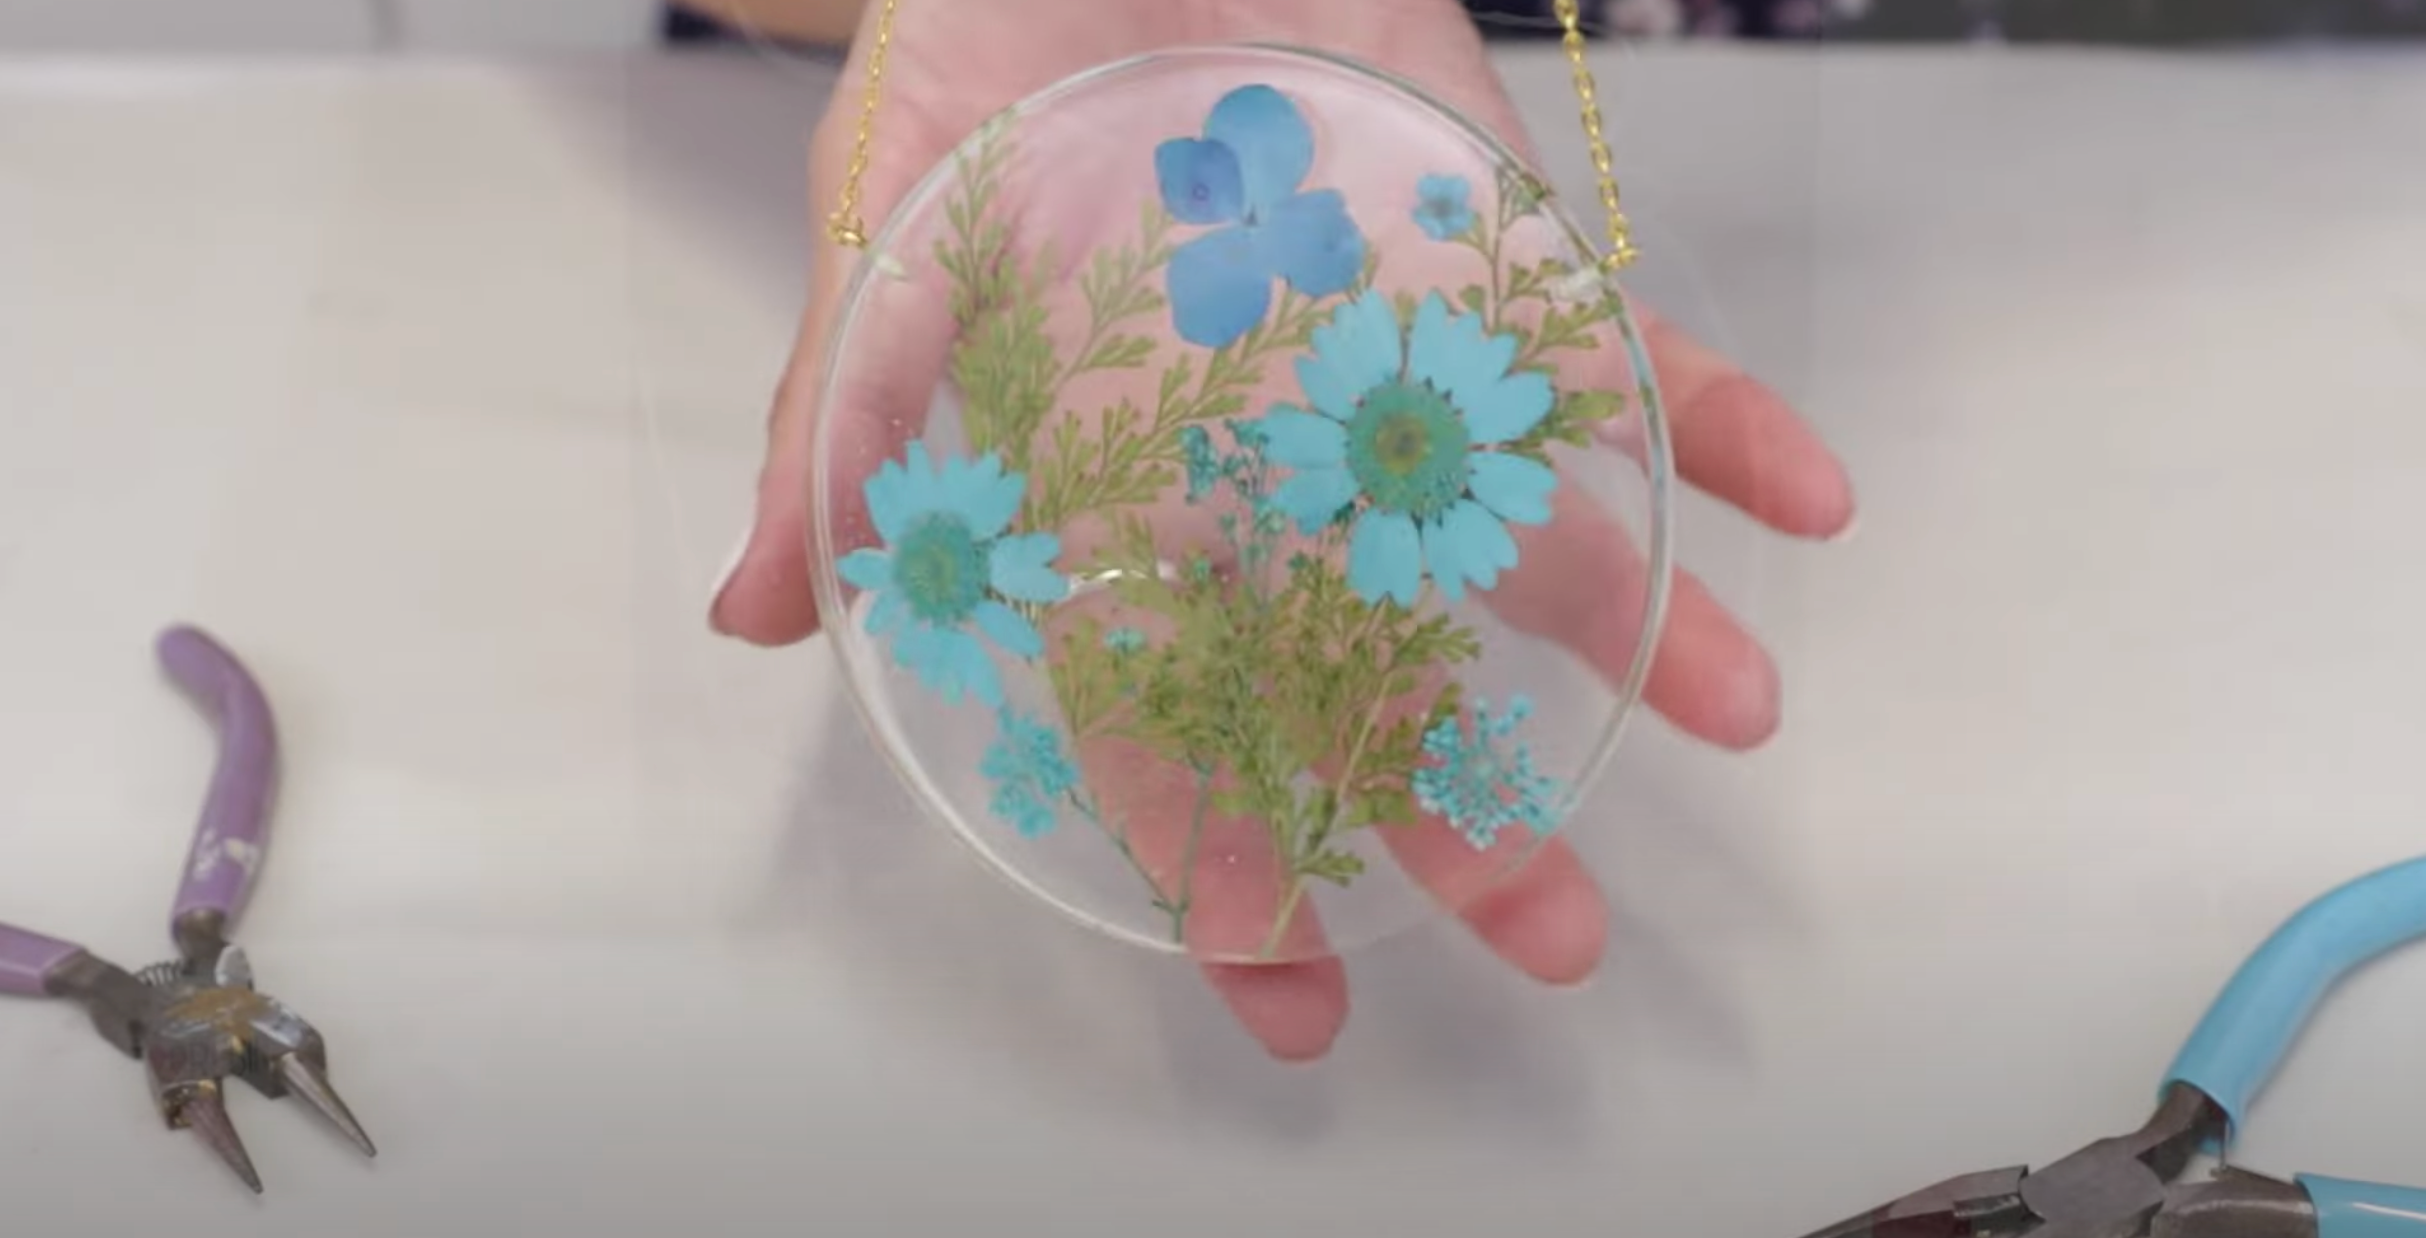 DRIED FLOWERS Embed in Resin